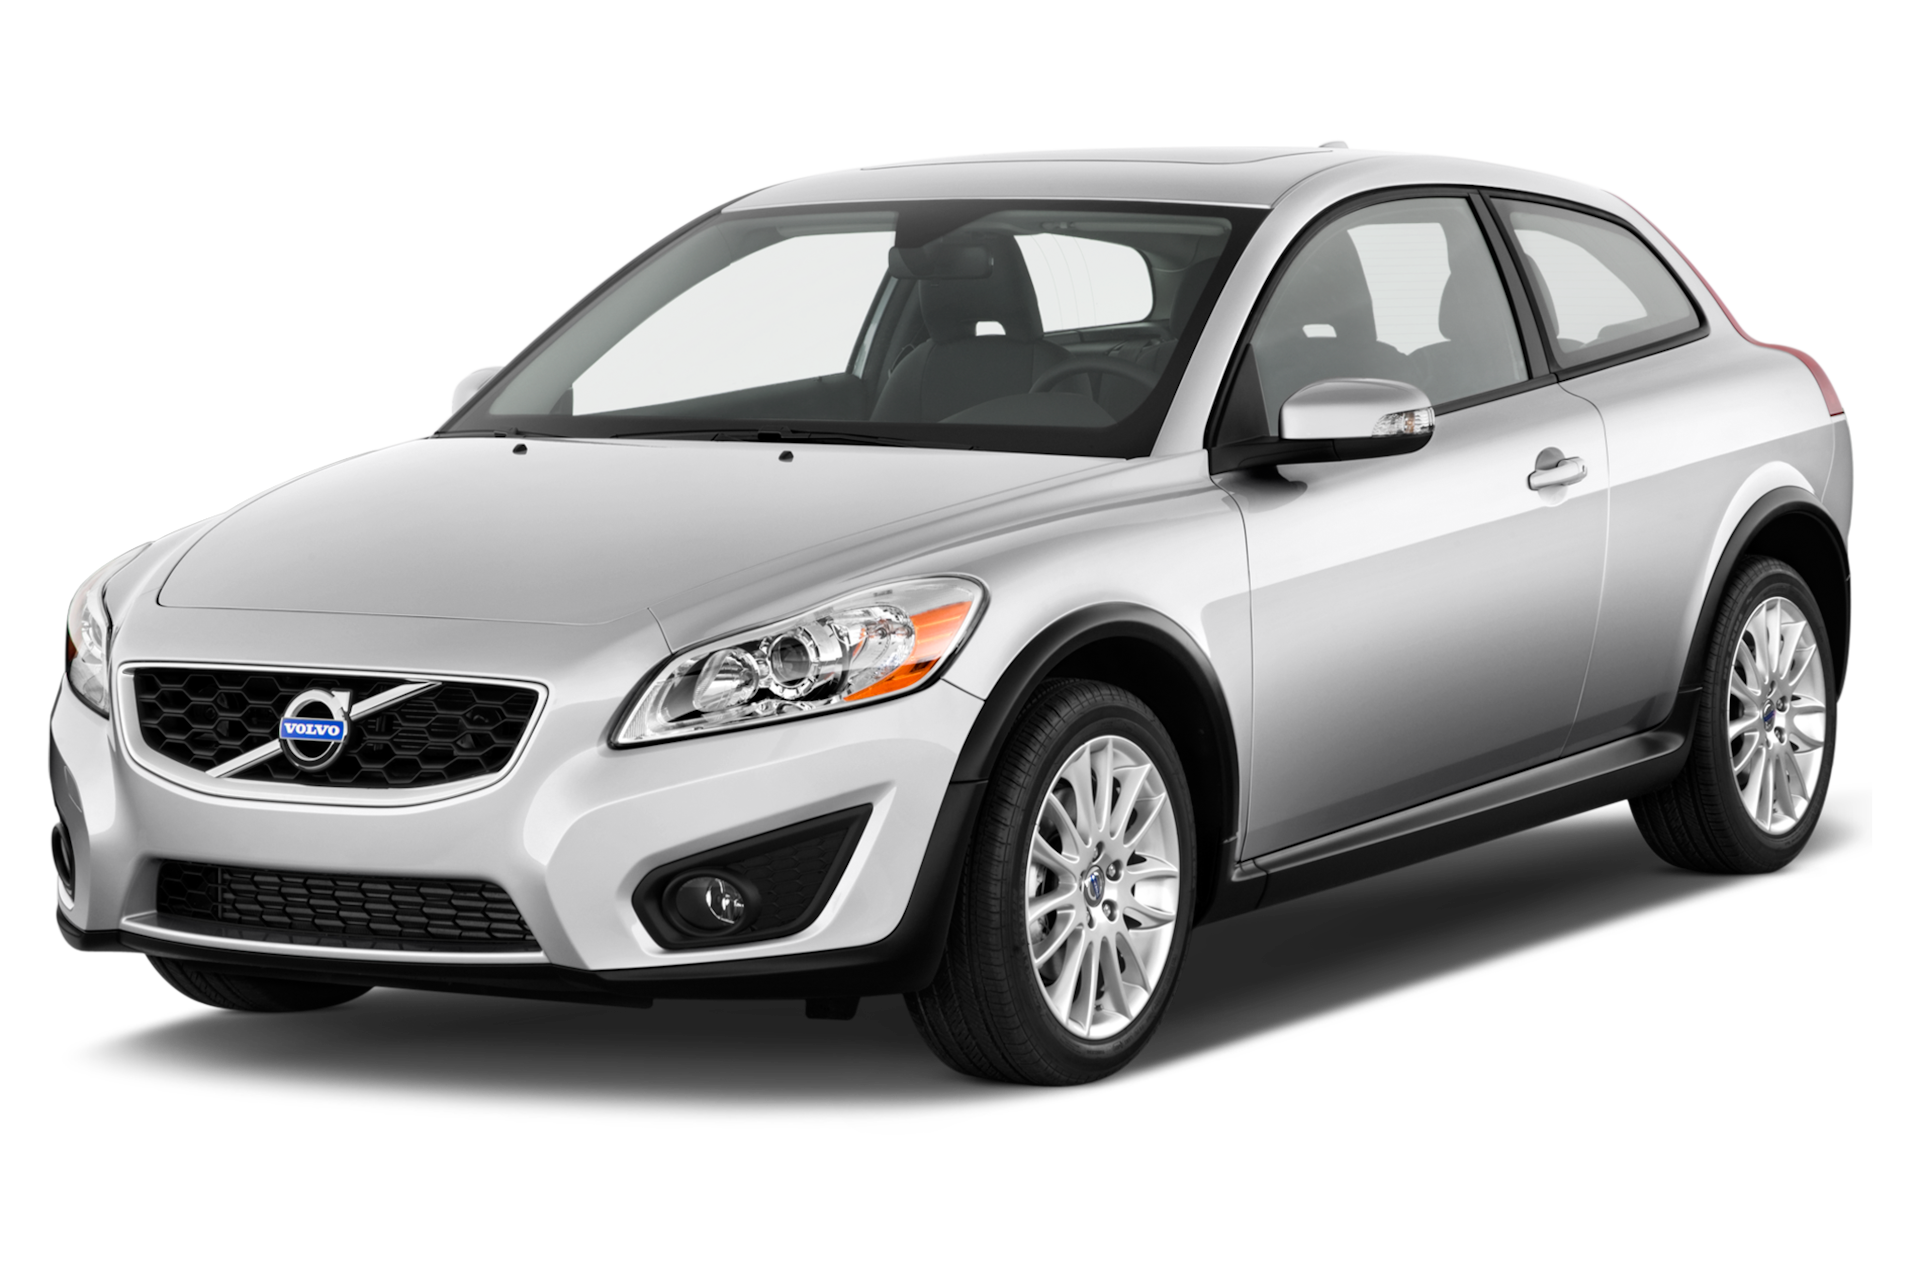 2012 Volvo C30 Prices, Reviews, and Photos - MotorTrend